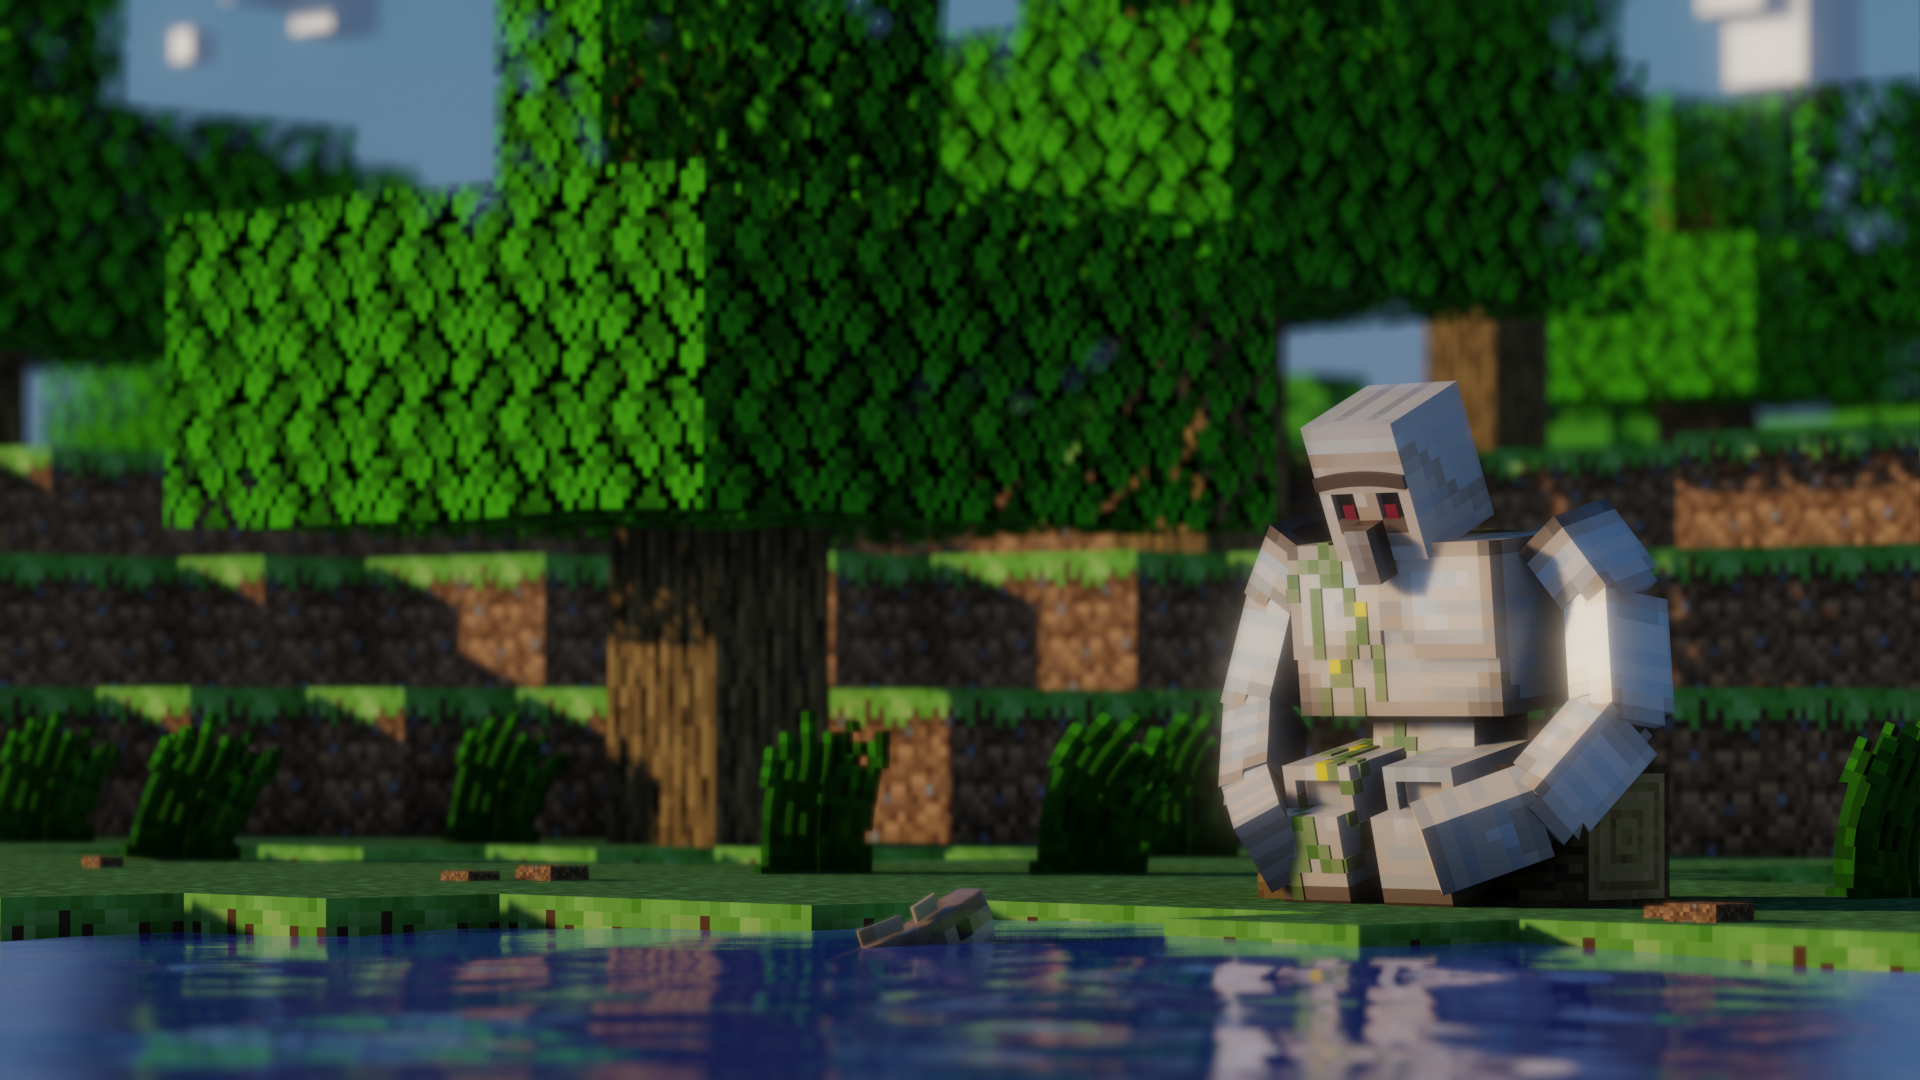 Iron Golem by the river.: Minecraft